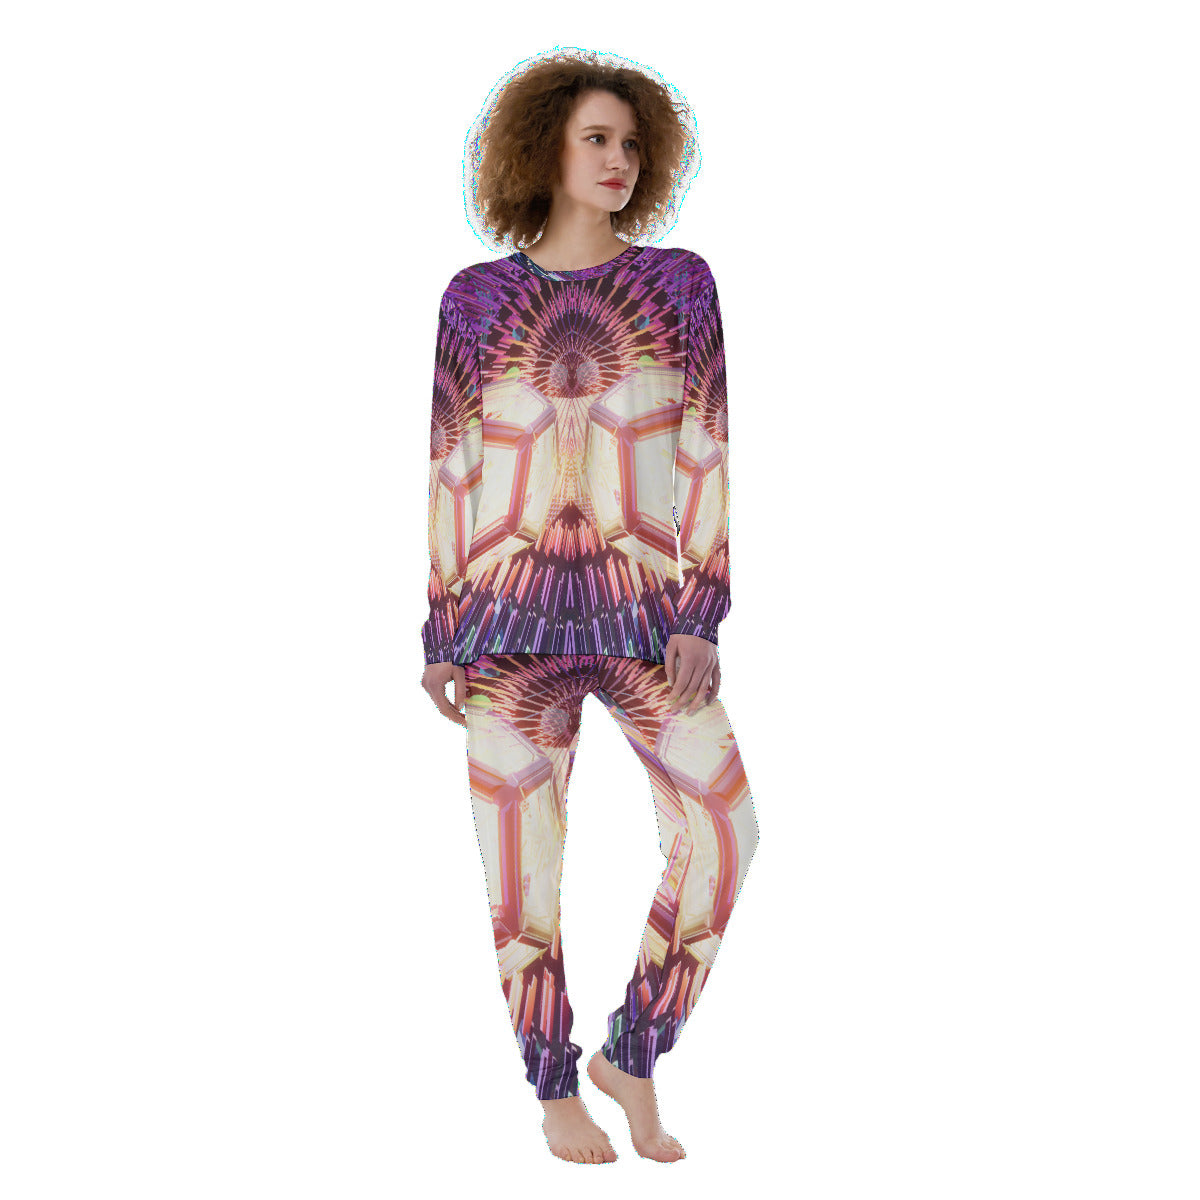 Psychedelic Dodecahedron 3D Digital Art Print Women's Pajamas